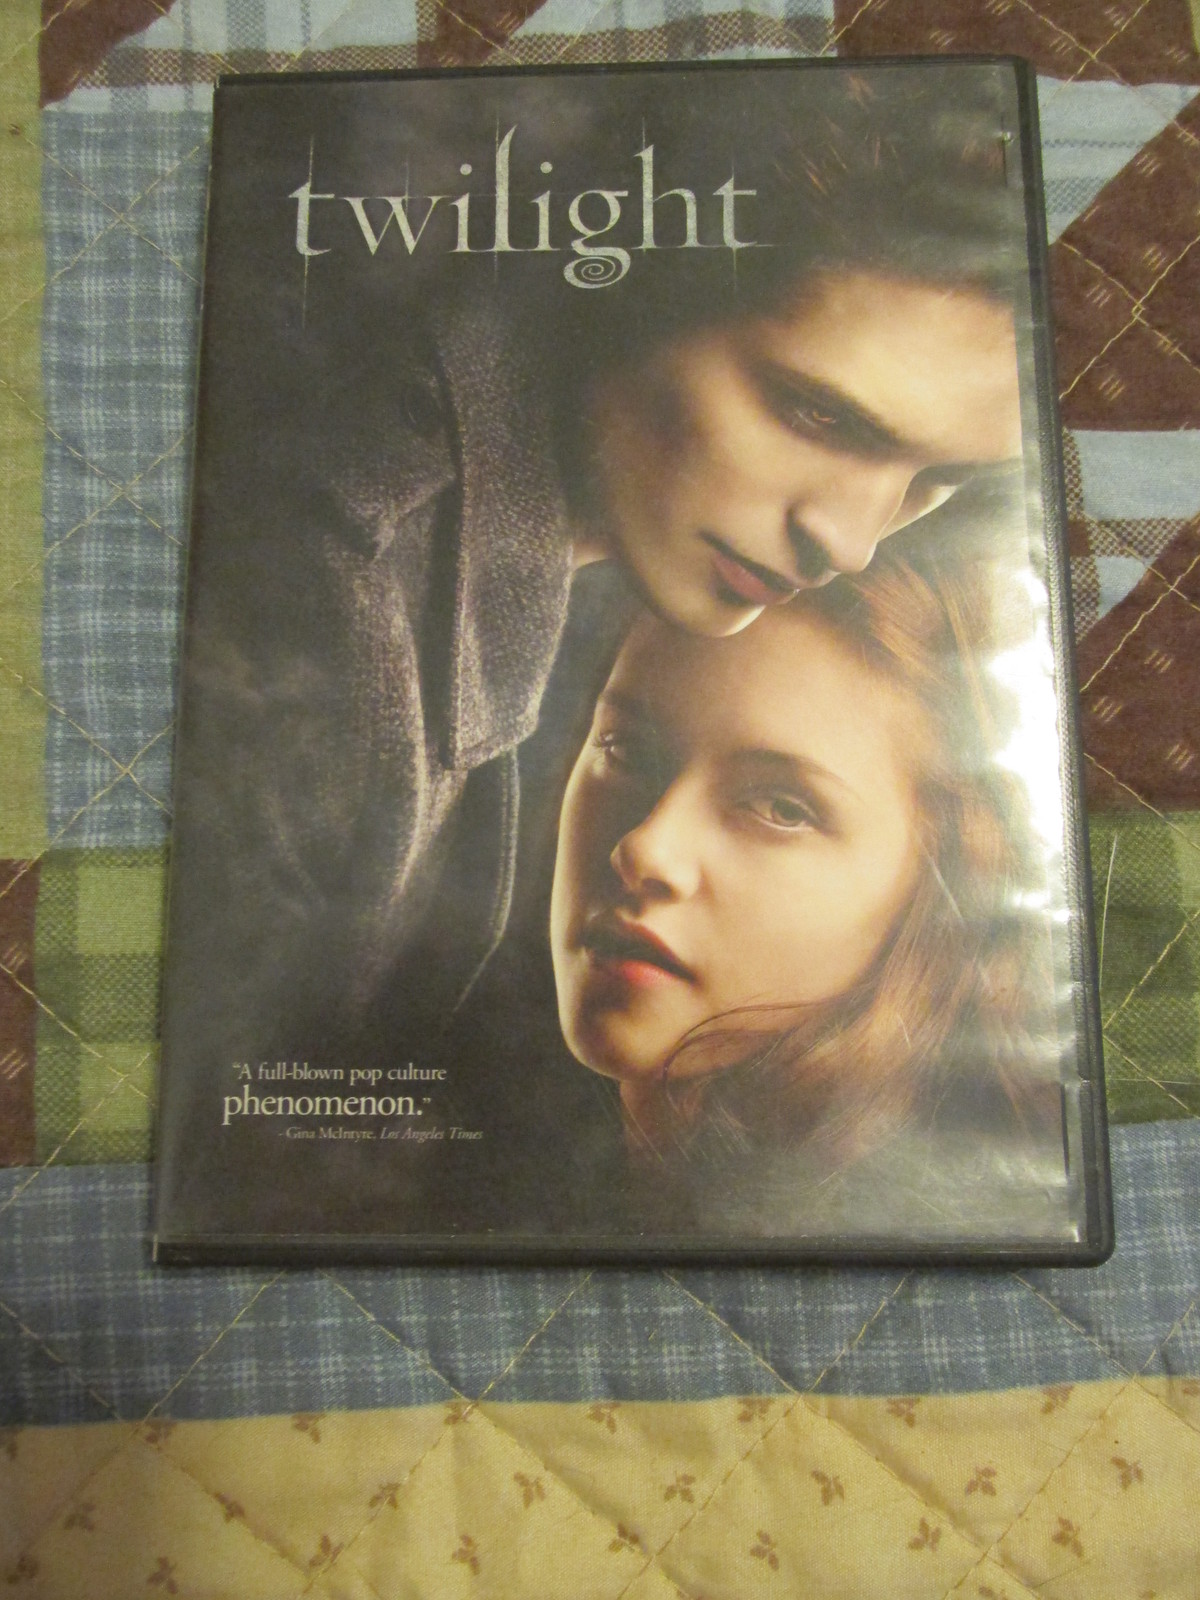 Primary image for Twilight DVD